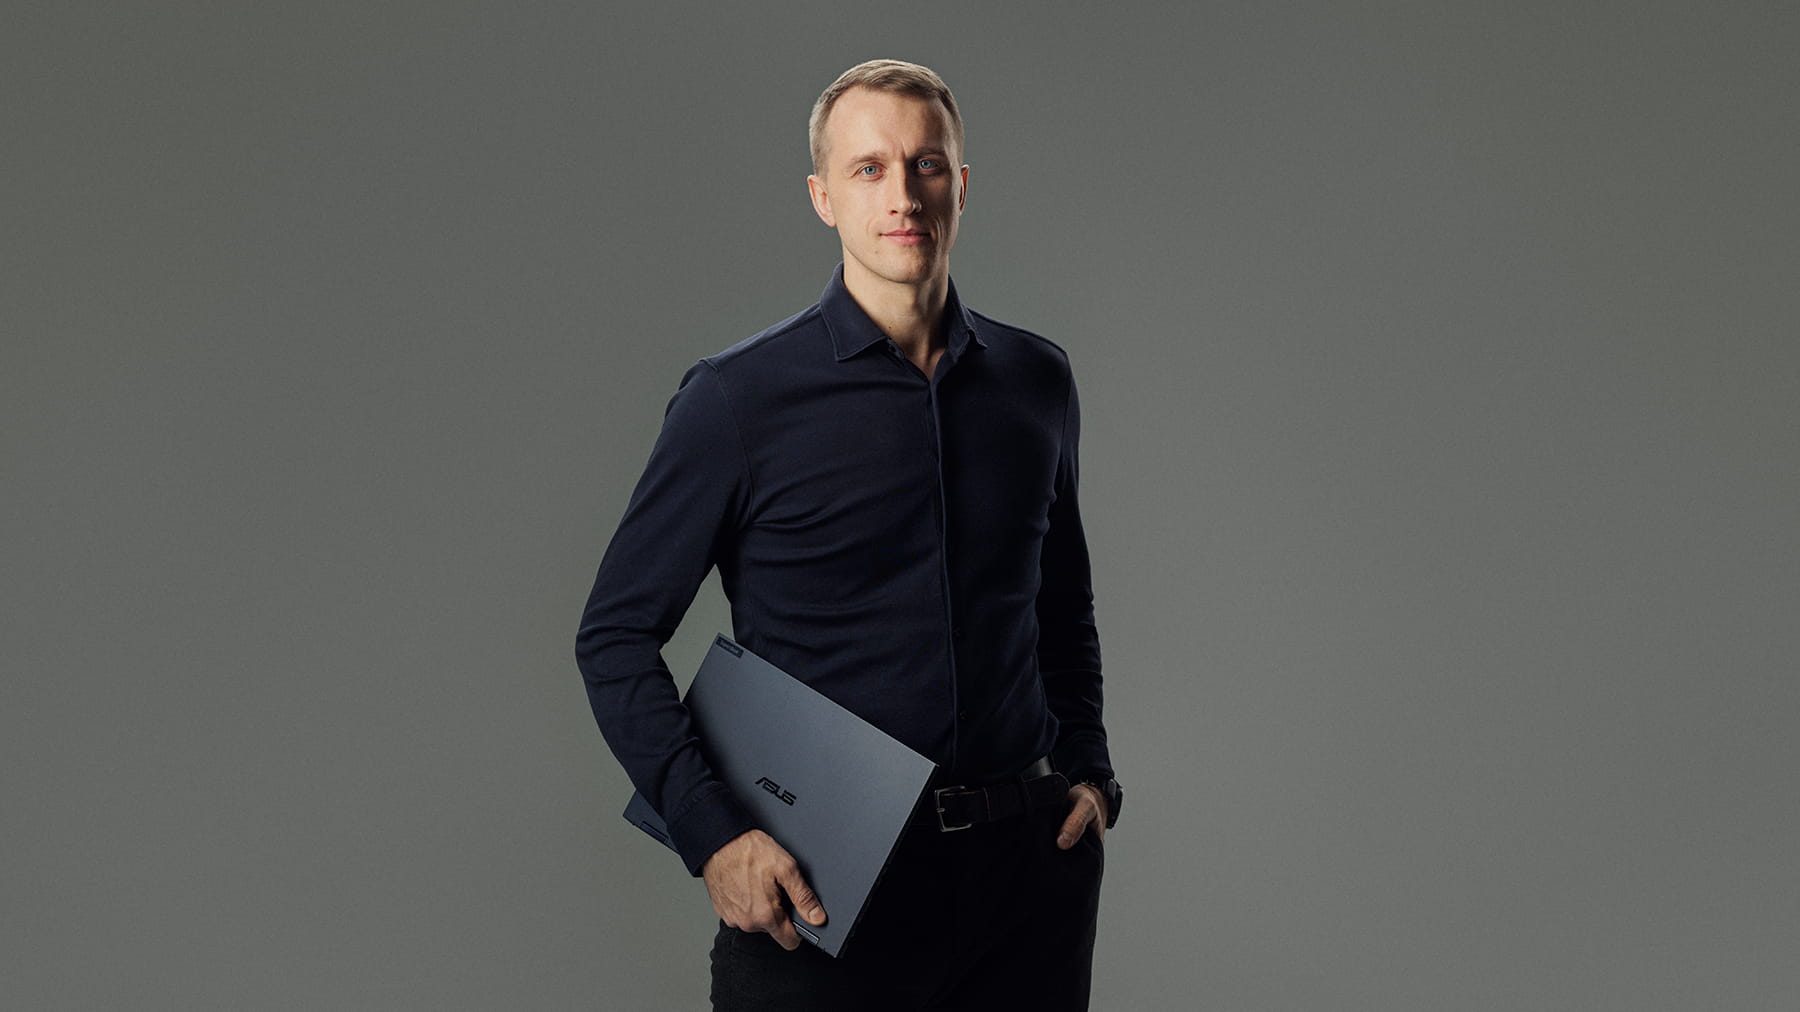 Rimas Kaminskas, ASUS commercial sales in Lithuania, holds ASUS ExpertBook